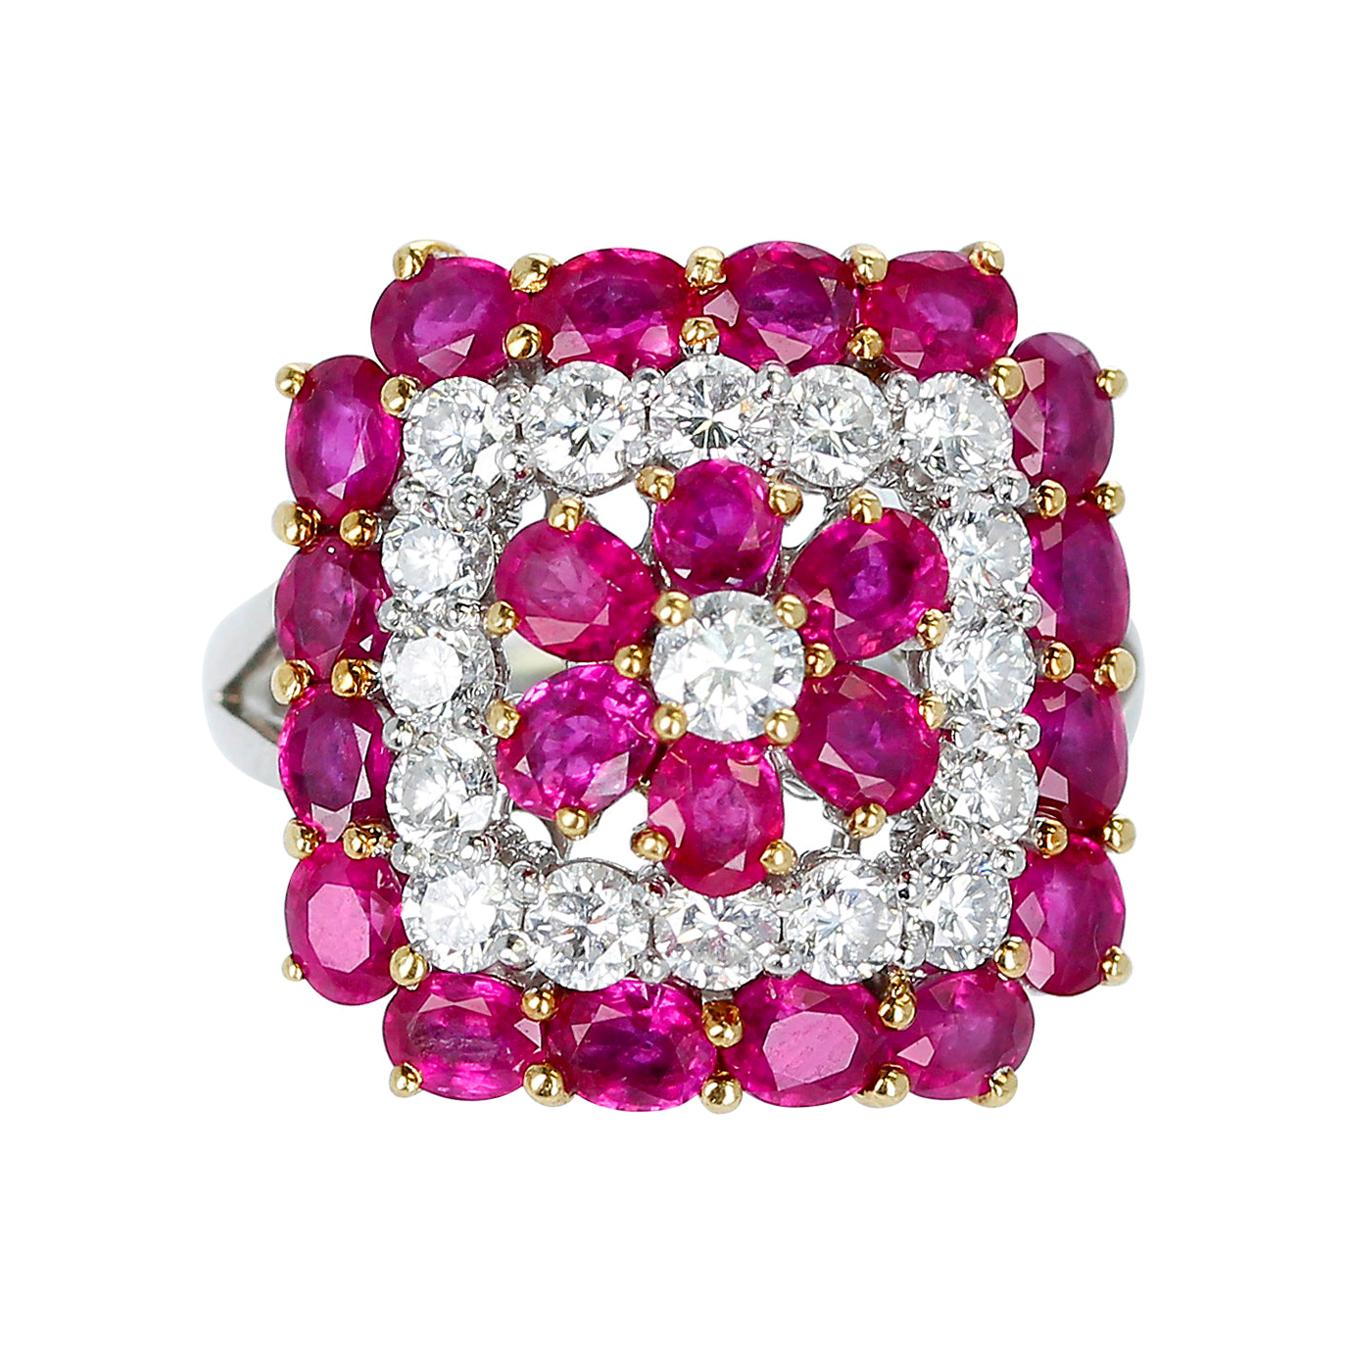 Floral-Design Round 4.19 Ct. Ruby and 1.50 Ct. Diamond Ring, Platinum & 18k Gold For Sale